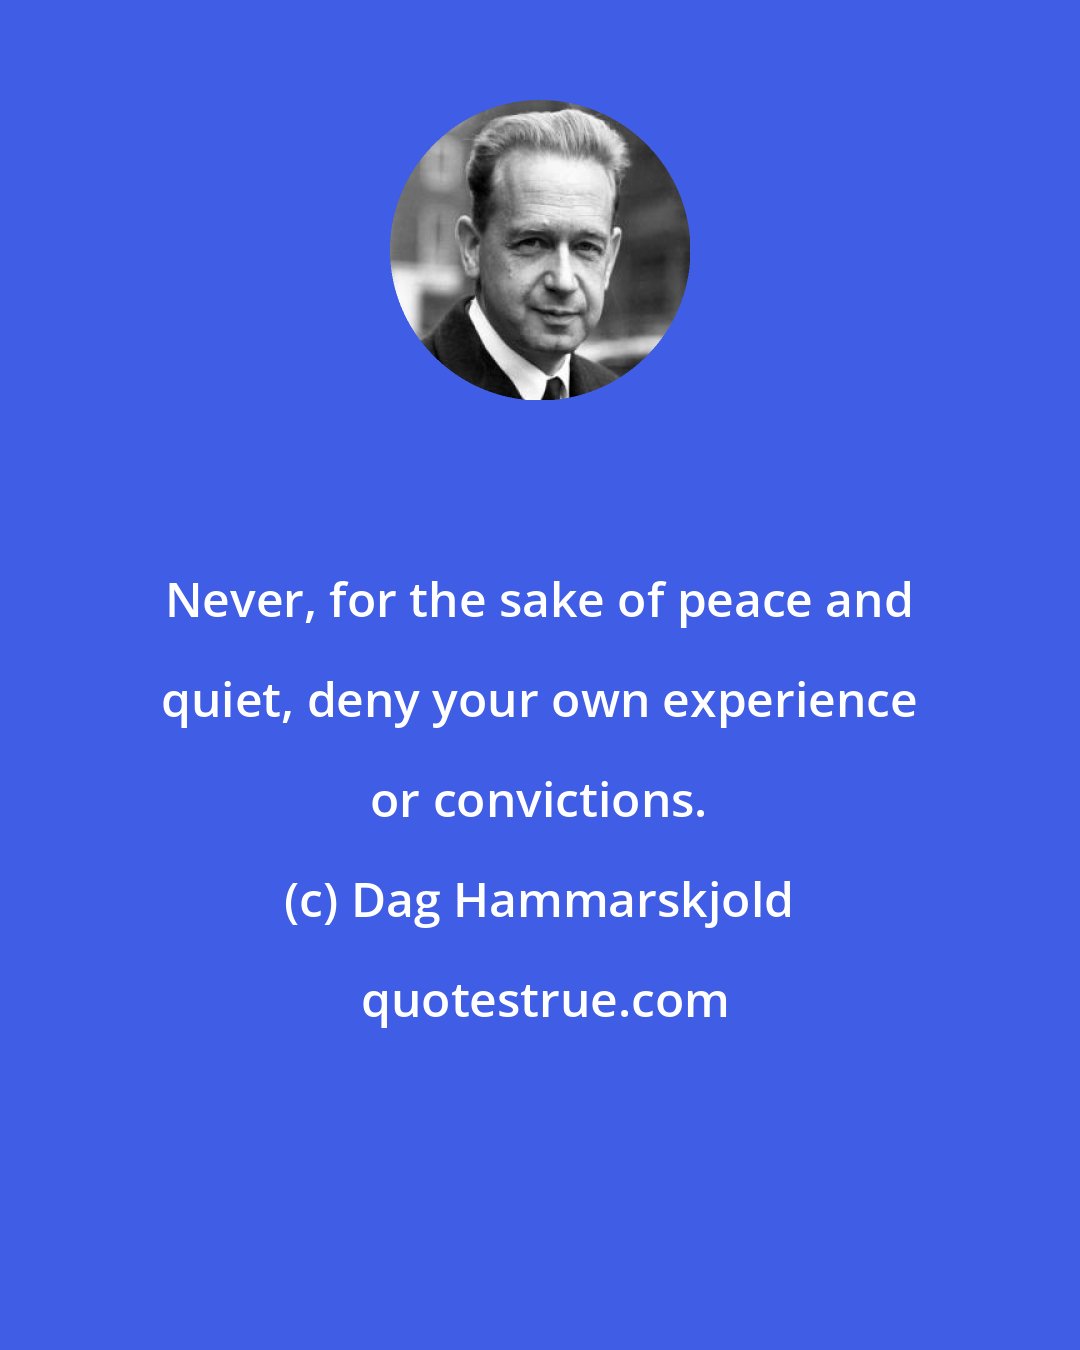 Dag Hammarskjold: Never, for the sake of peace and quiet, deny your own experience or convictions.